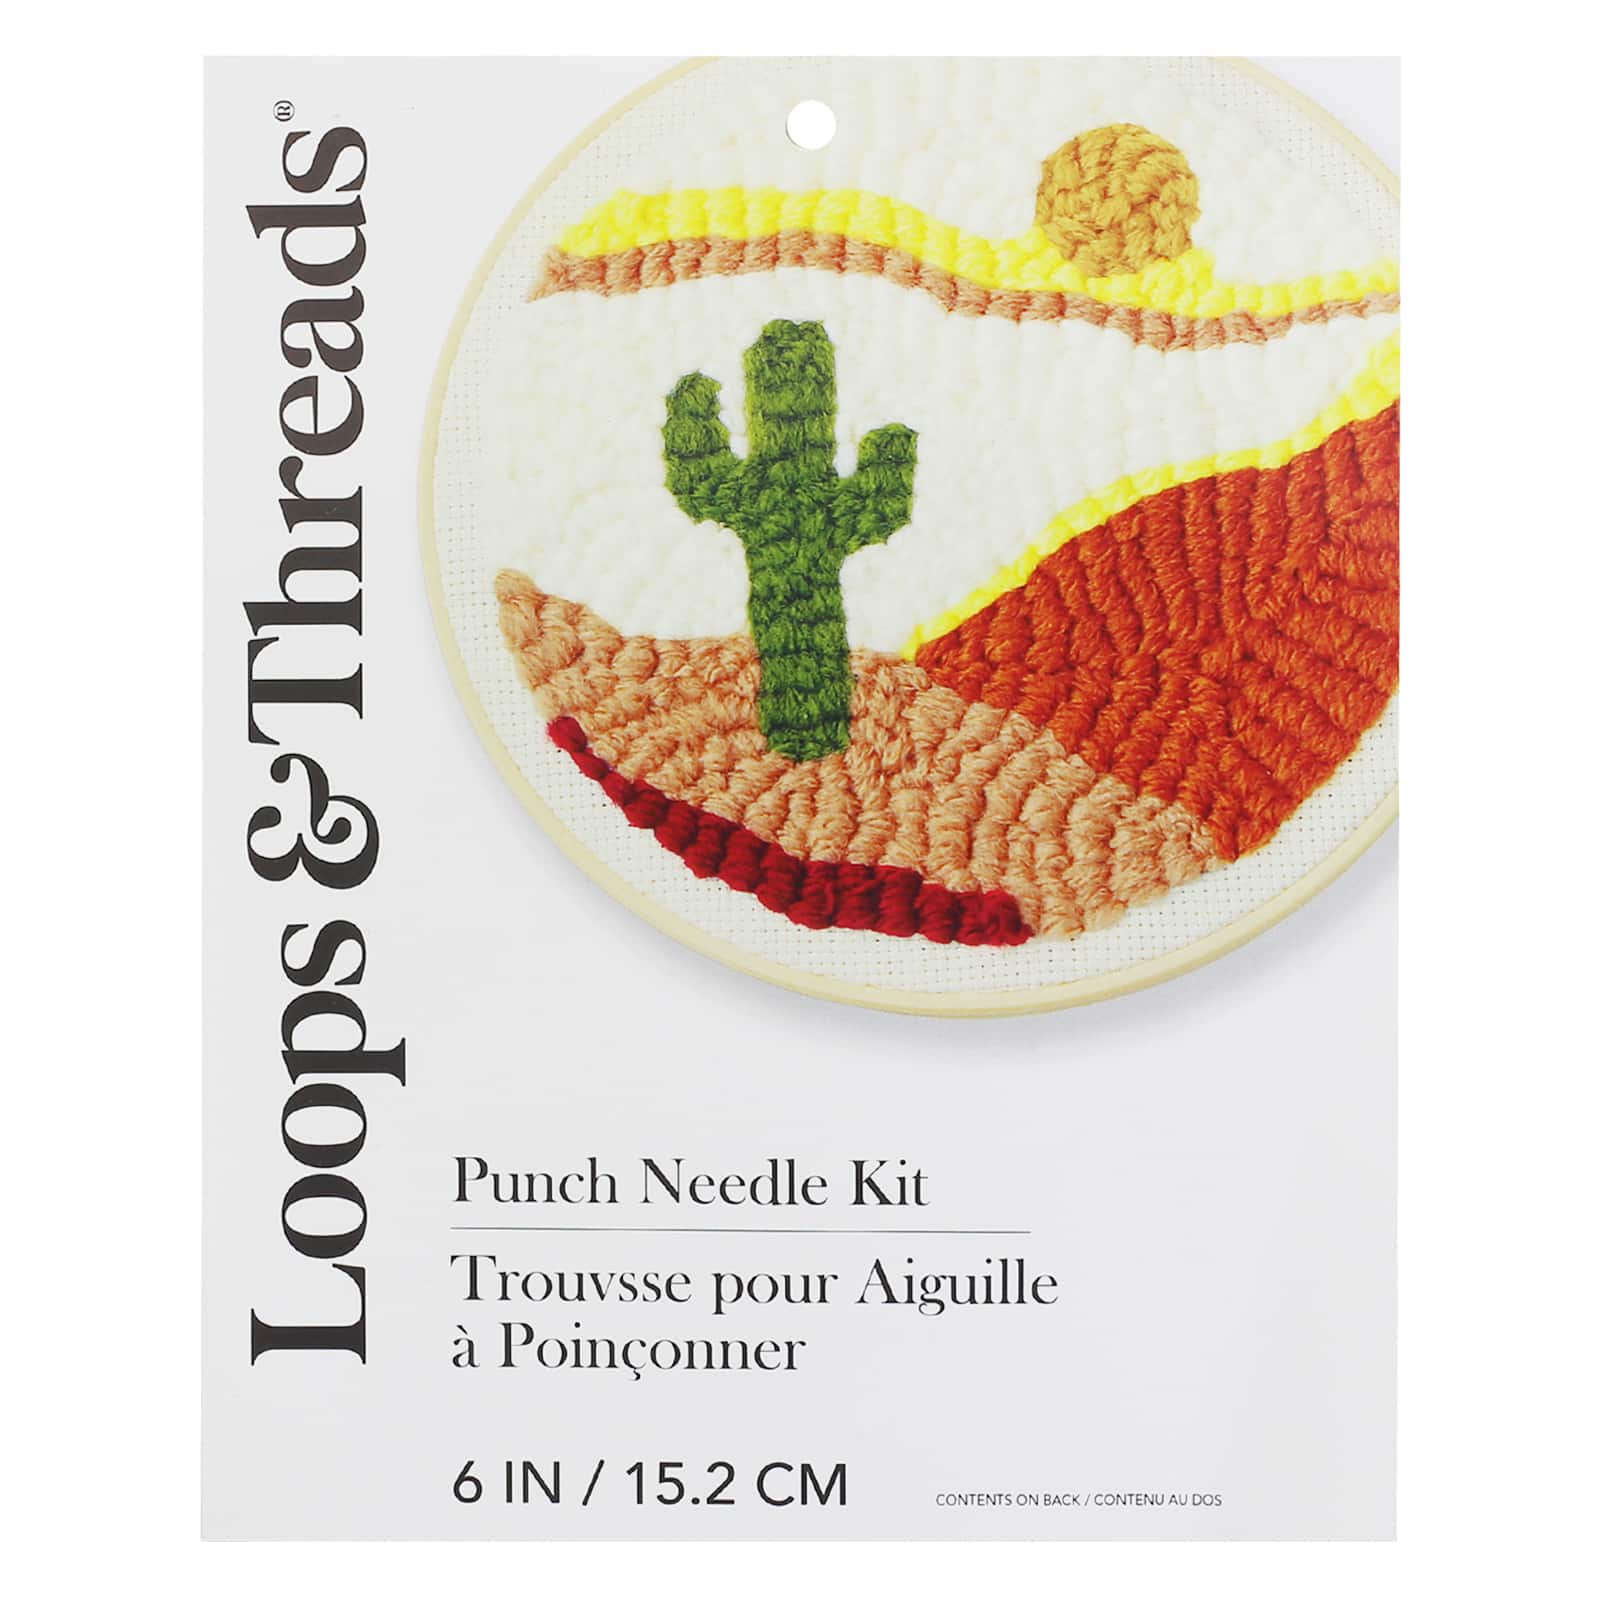 Loops & Threads Cactus Punch Needle Kit Embroidery Hoop Floss & Needle NEW